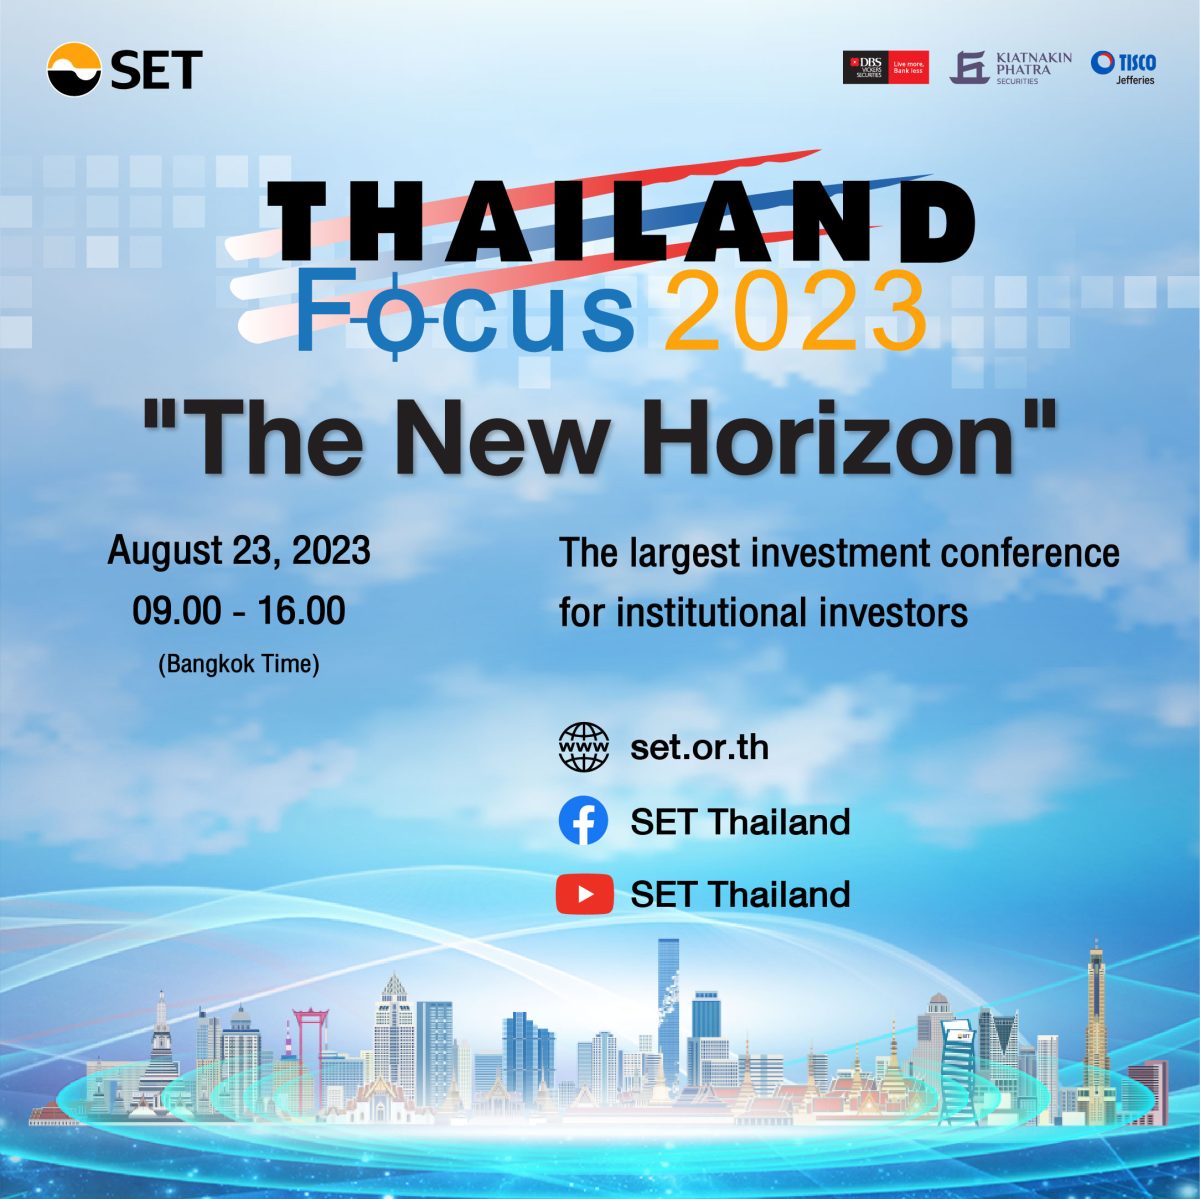 118 listed firms, public and private sectors ready to showcase the Thai economy and capital market strengths in Thailand annual flagship